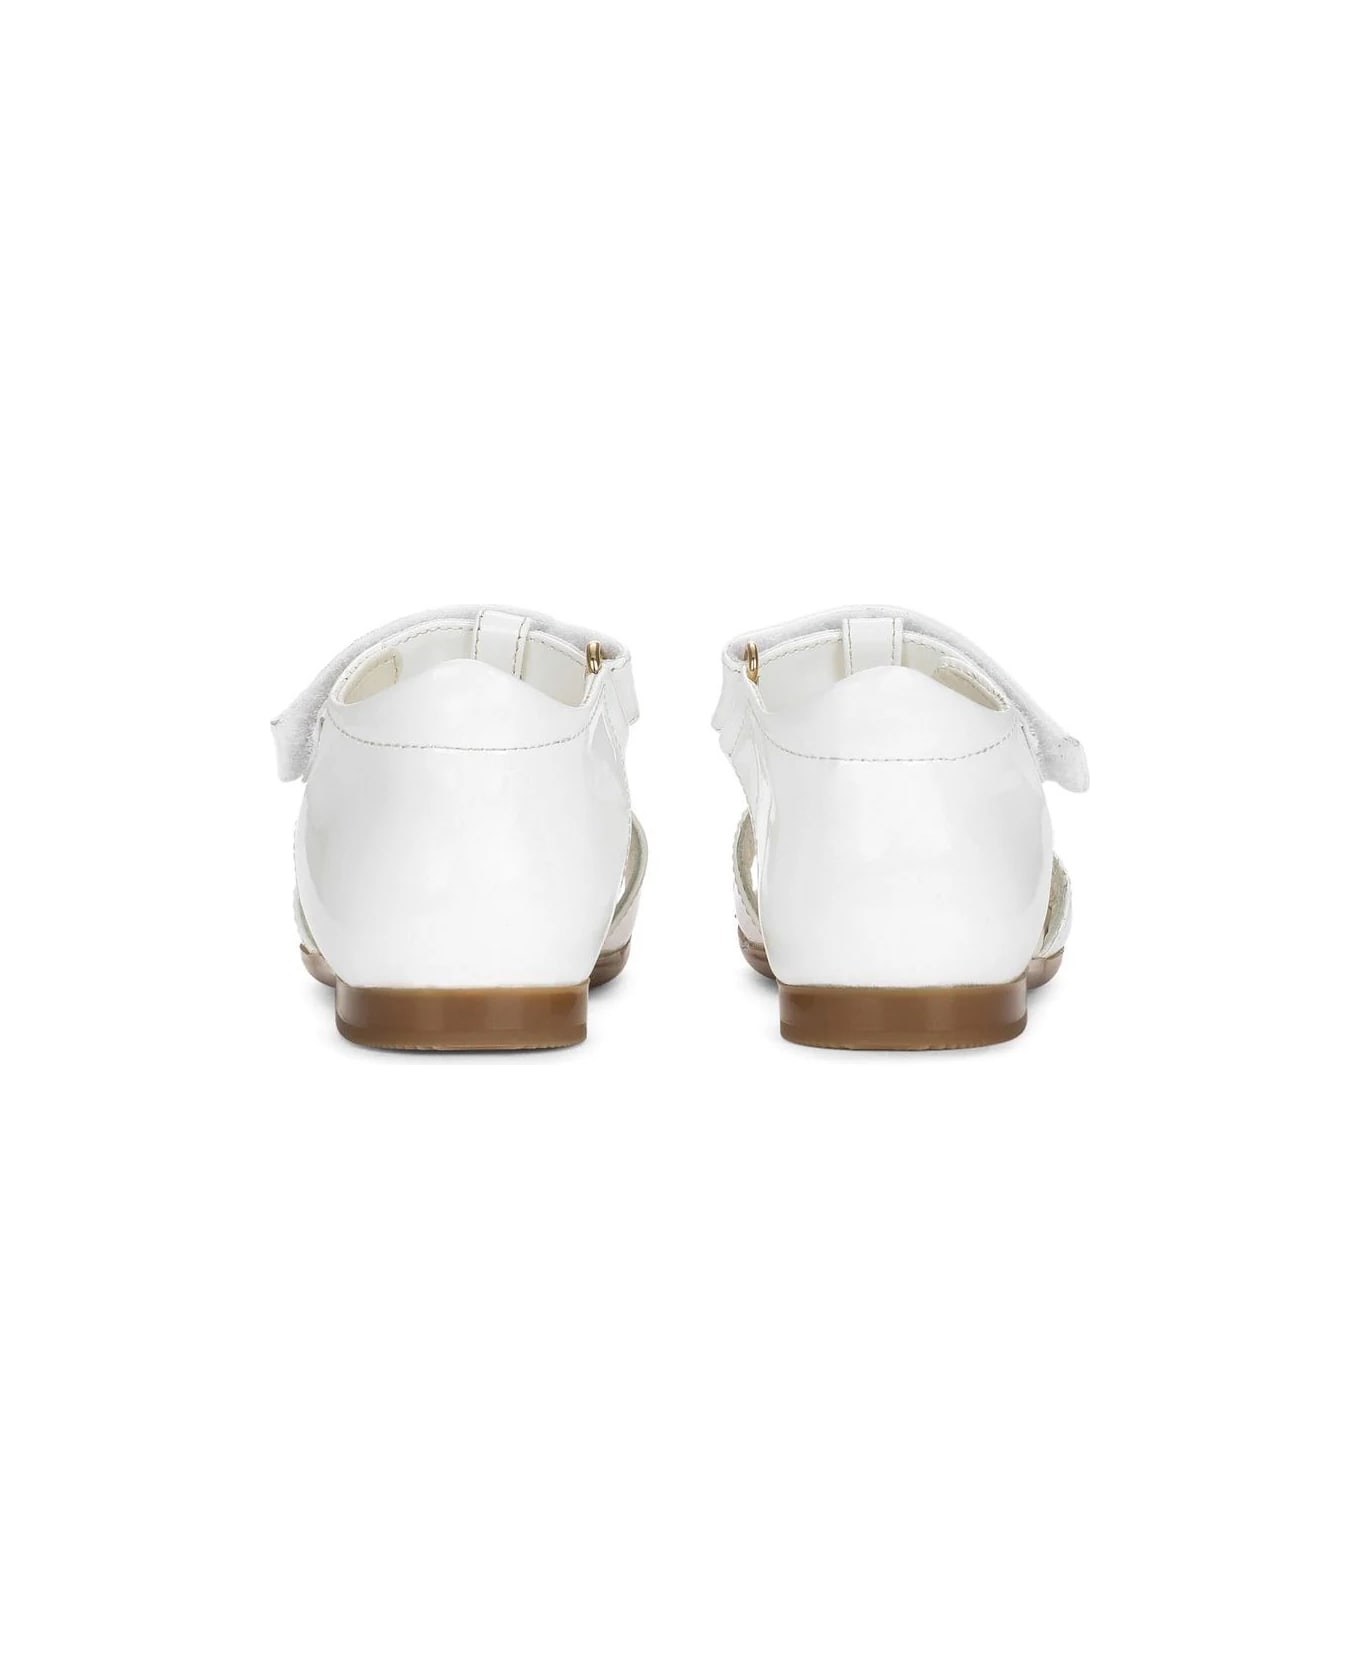 Dolce & Gabbana White Patent Leather Sandals With Dg Logo - White